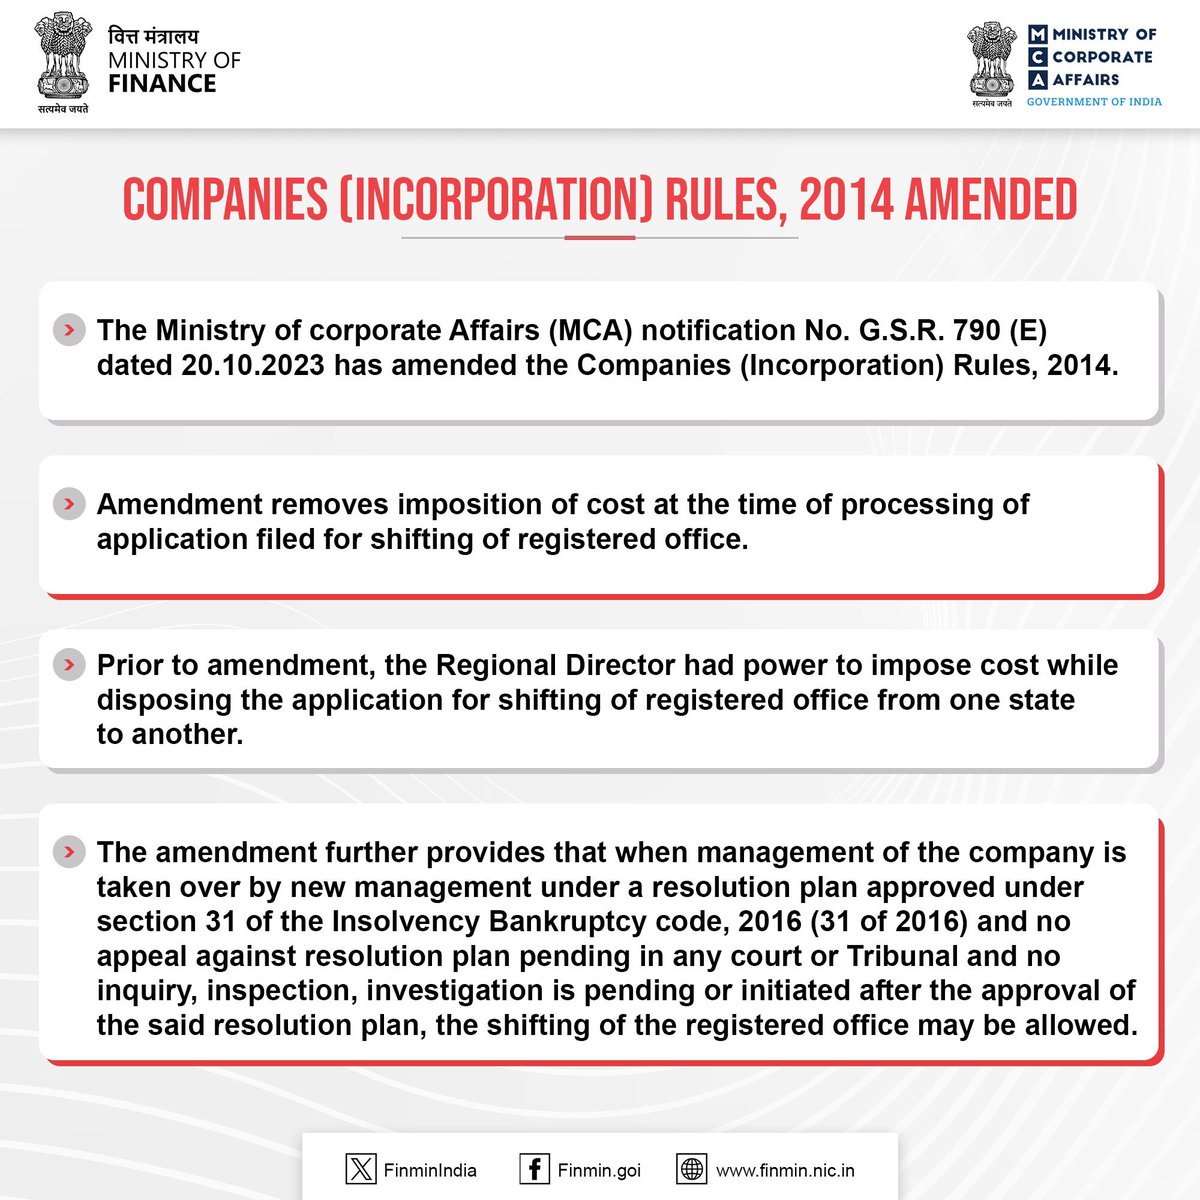 Companies (Incorporation) rules 2014, amendment provides certain relaxations to companies if certain conditions have been fulfilled.

#ViksitBharat 
#FinMinReview2023
#MCAReview2023